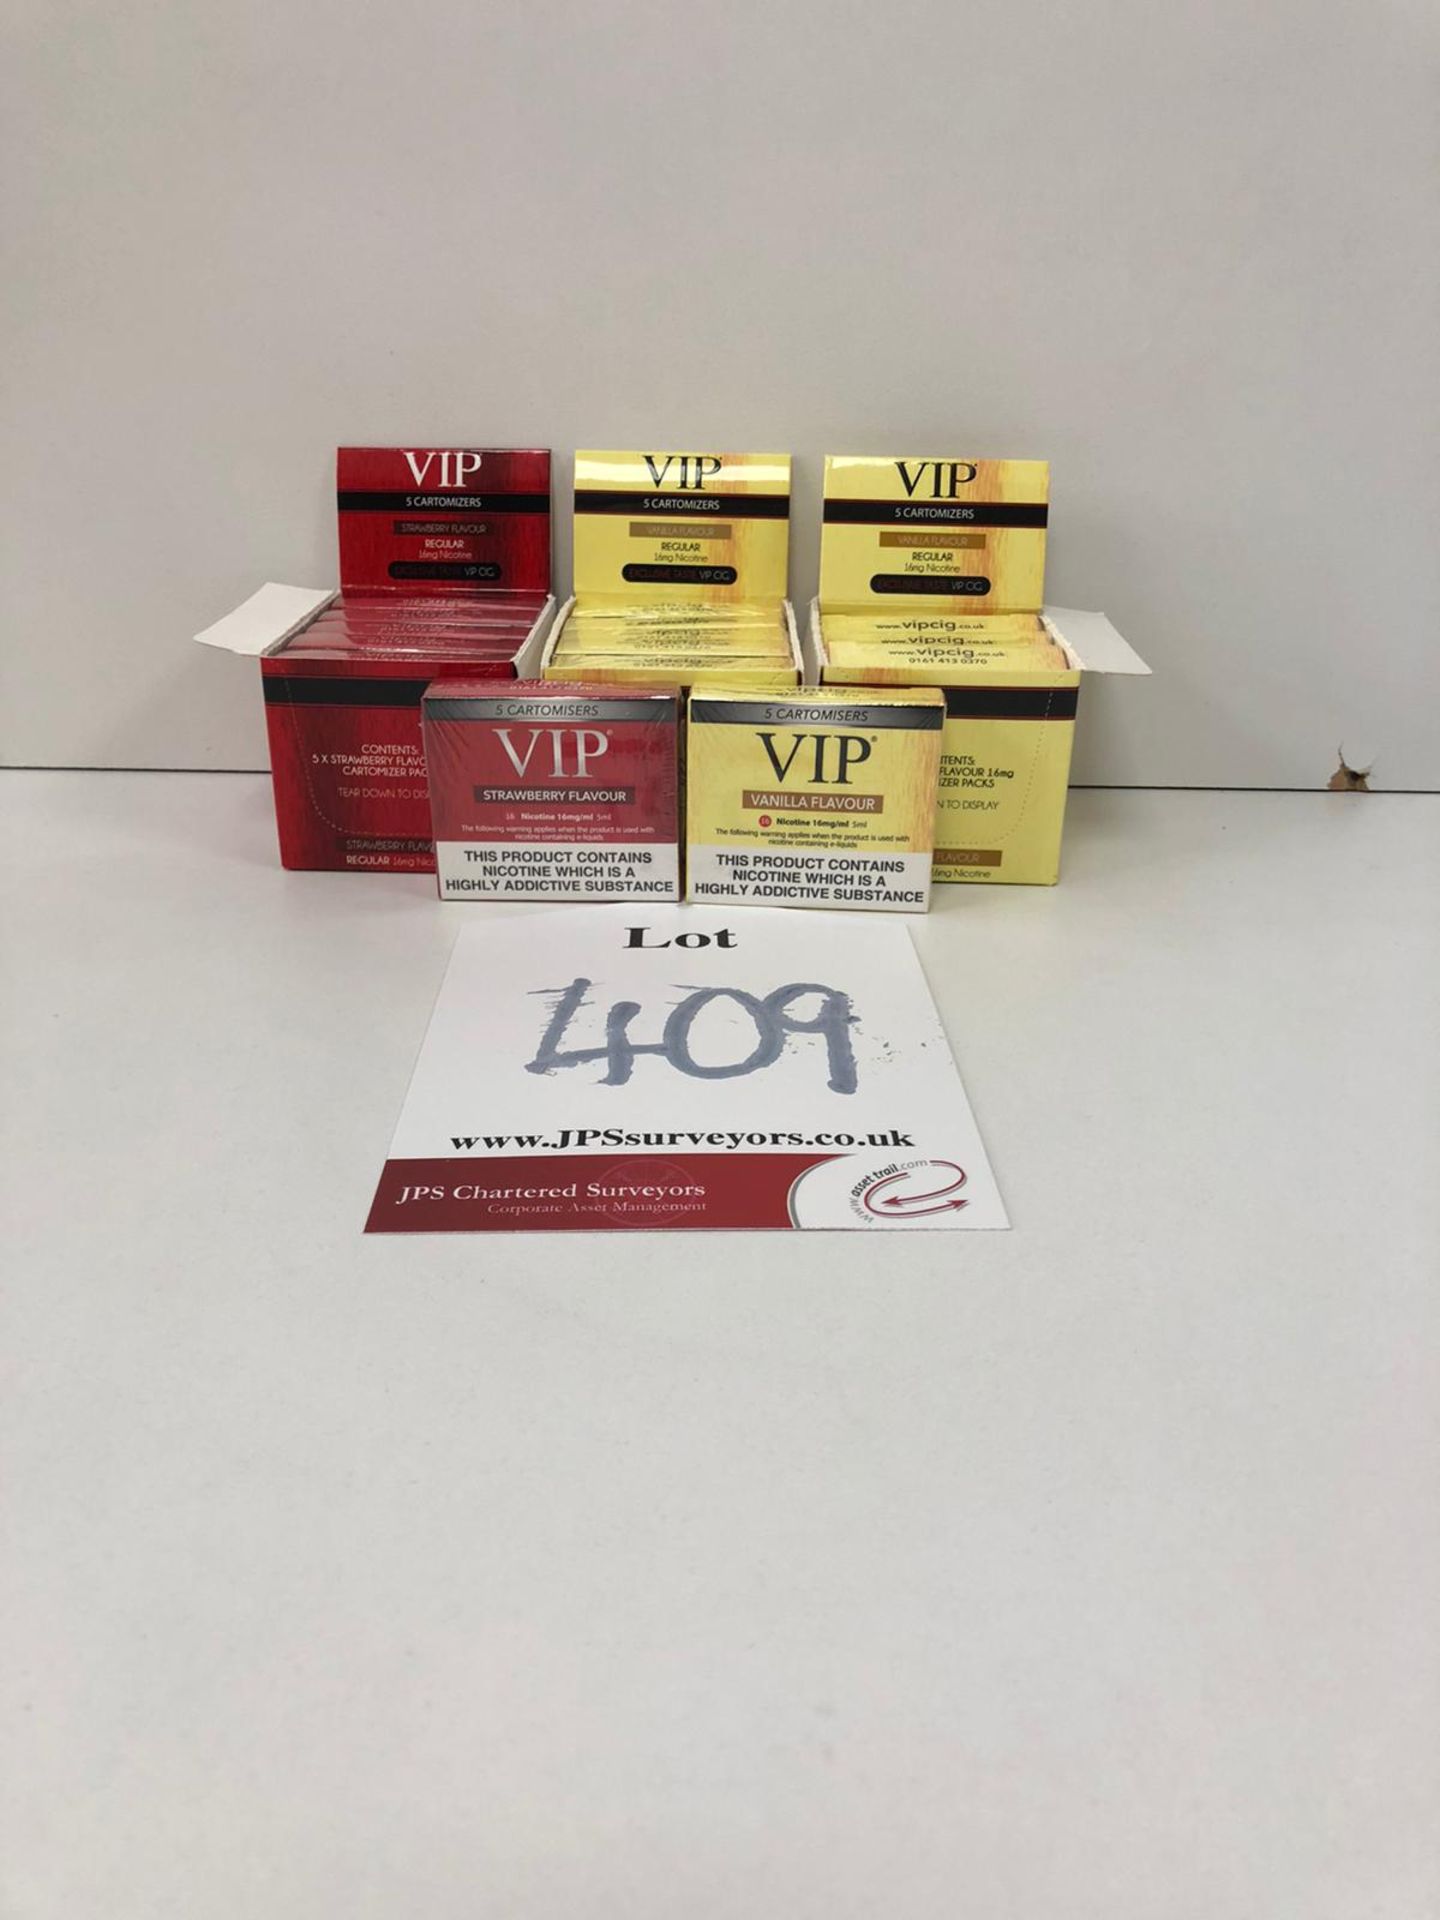 15 x VIP past or short best before date liquids as listed